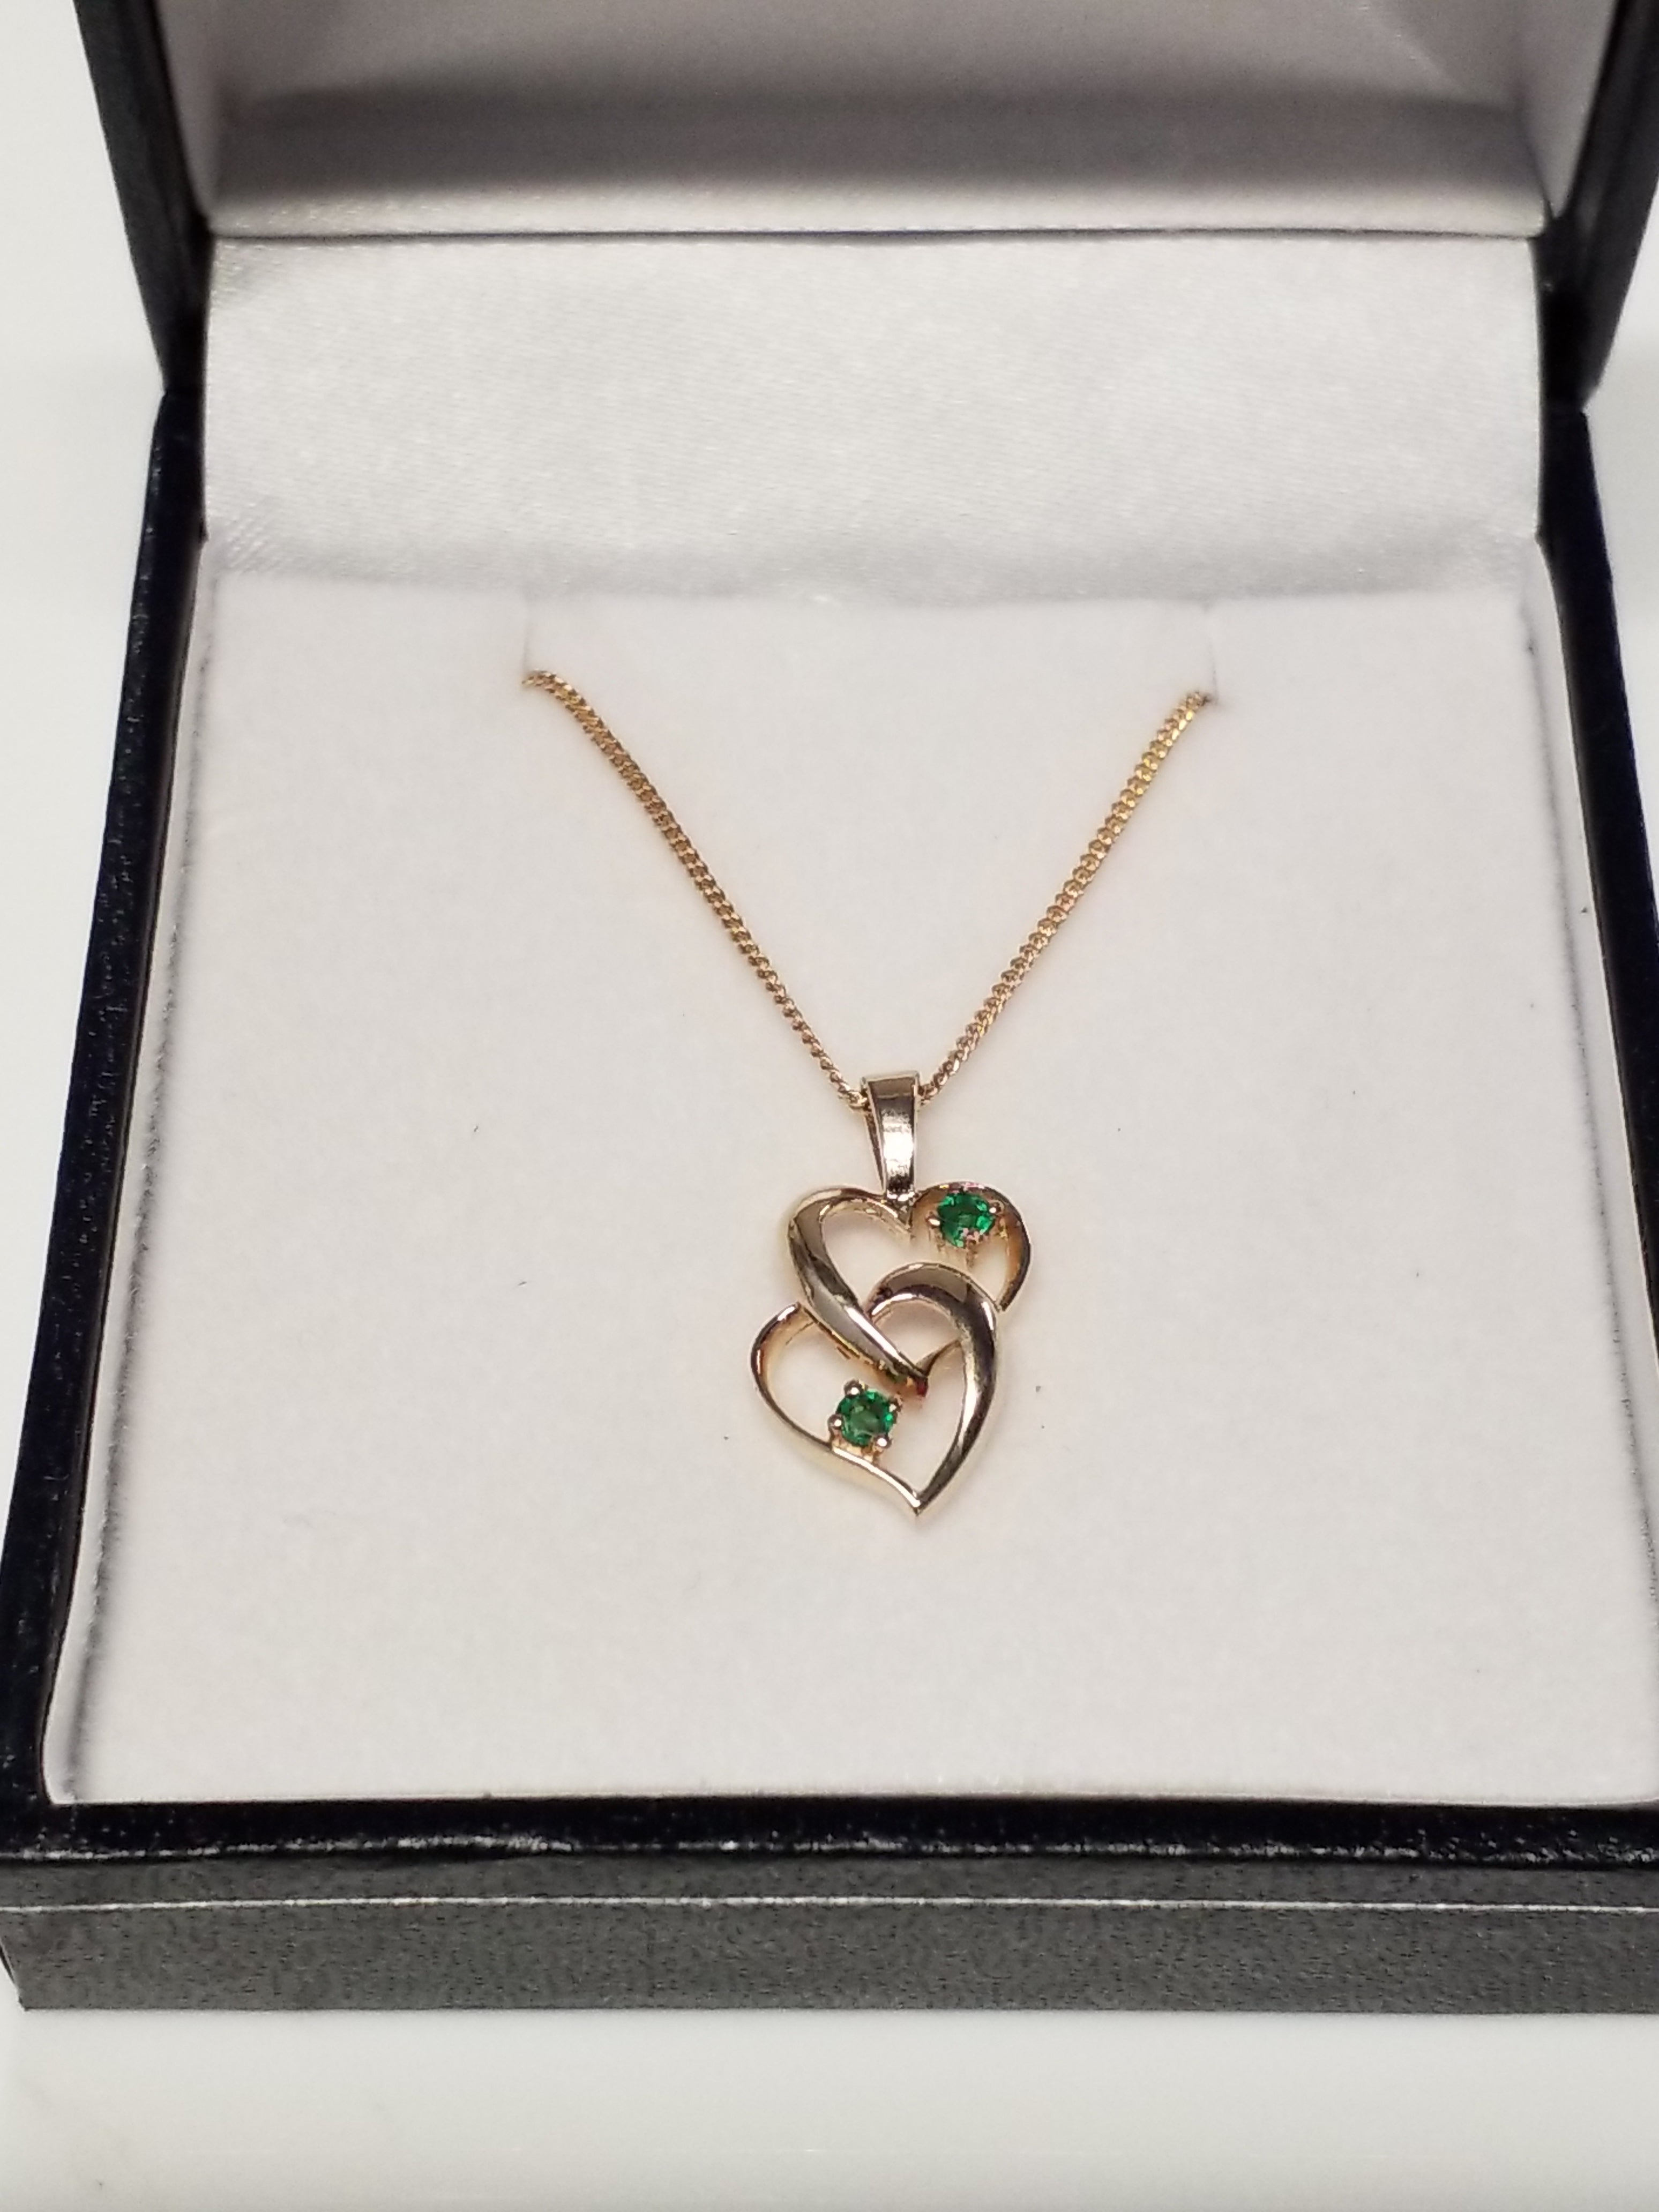 Two Round Cut Emeralds Pendant - Double Hearts P1080